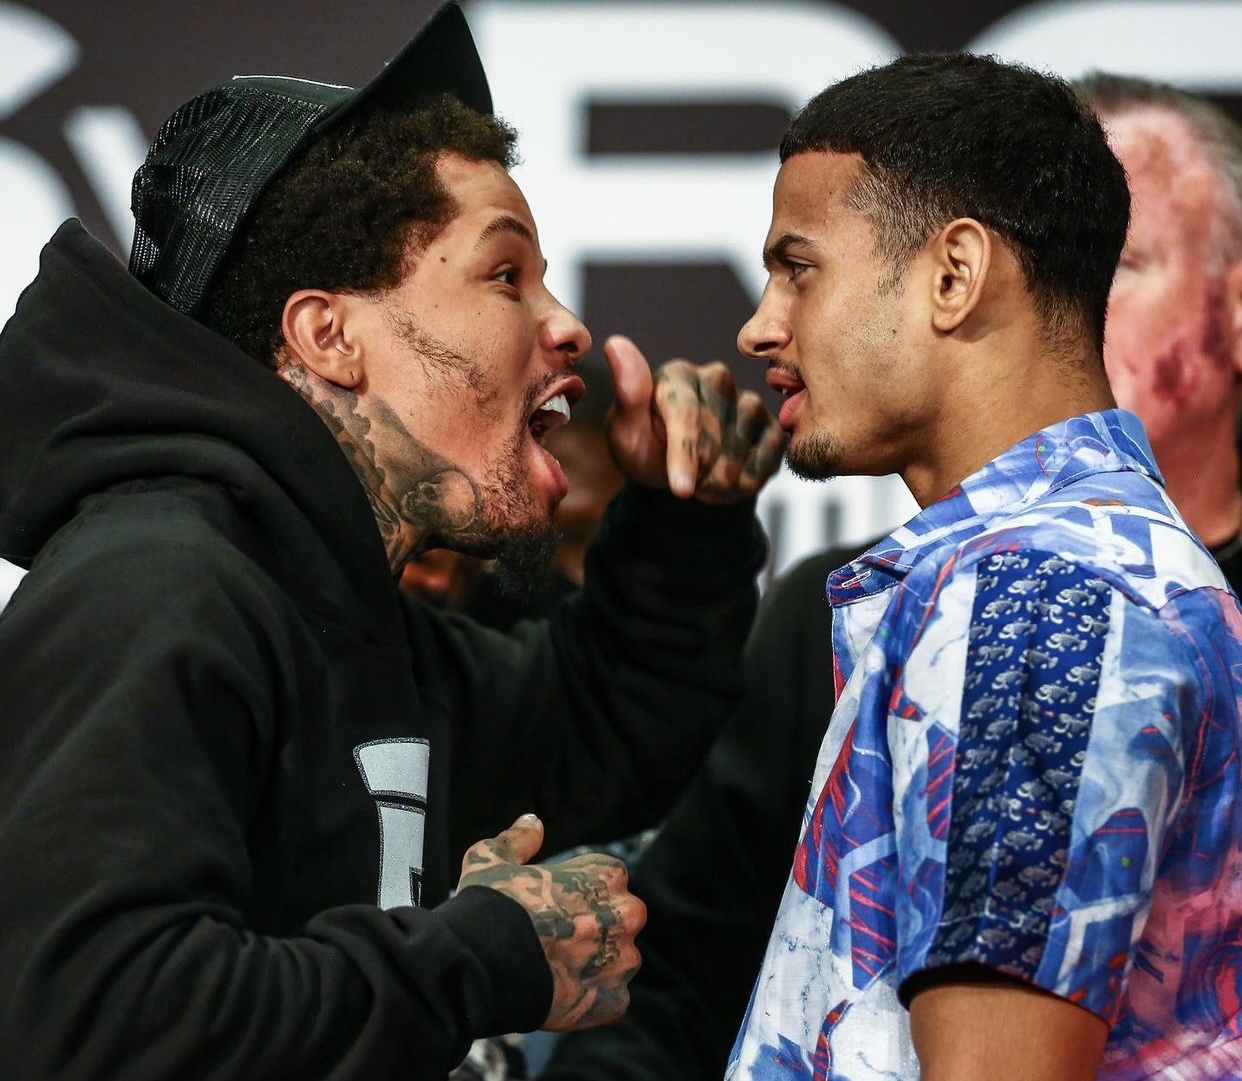 Gervonta and Romero were hostile in their face-to-face confrontation